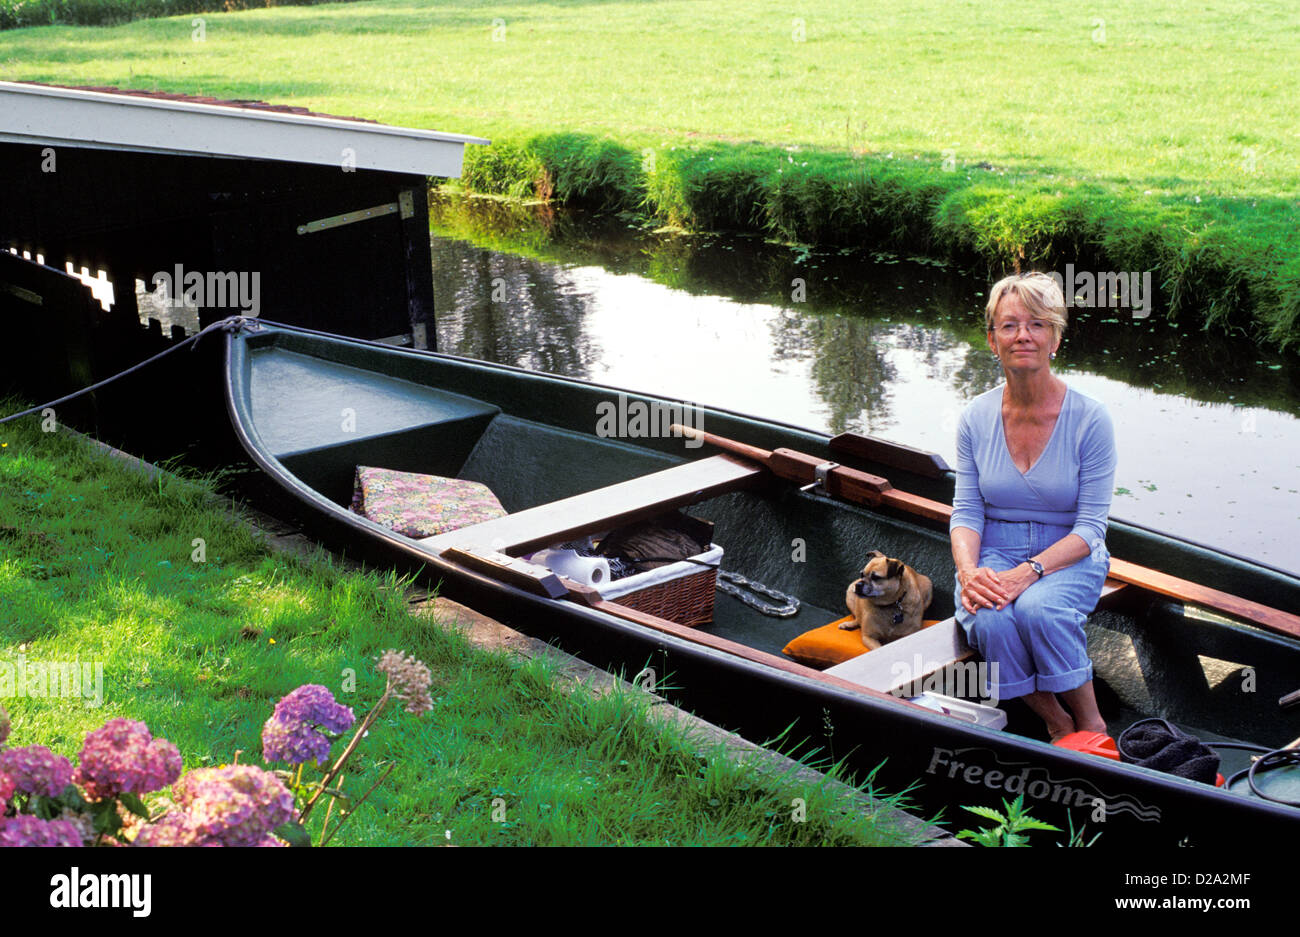 Netherlands. Amsterdam. Watergang. Woman And Dog On Small Boat. Canal. Stock Photo